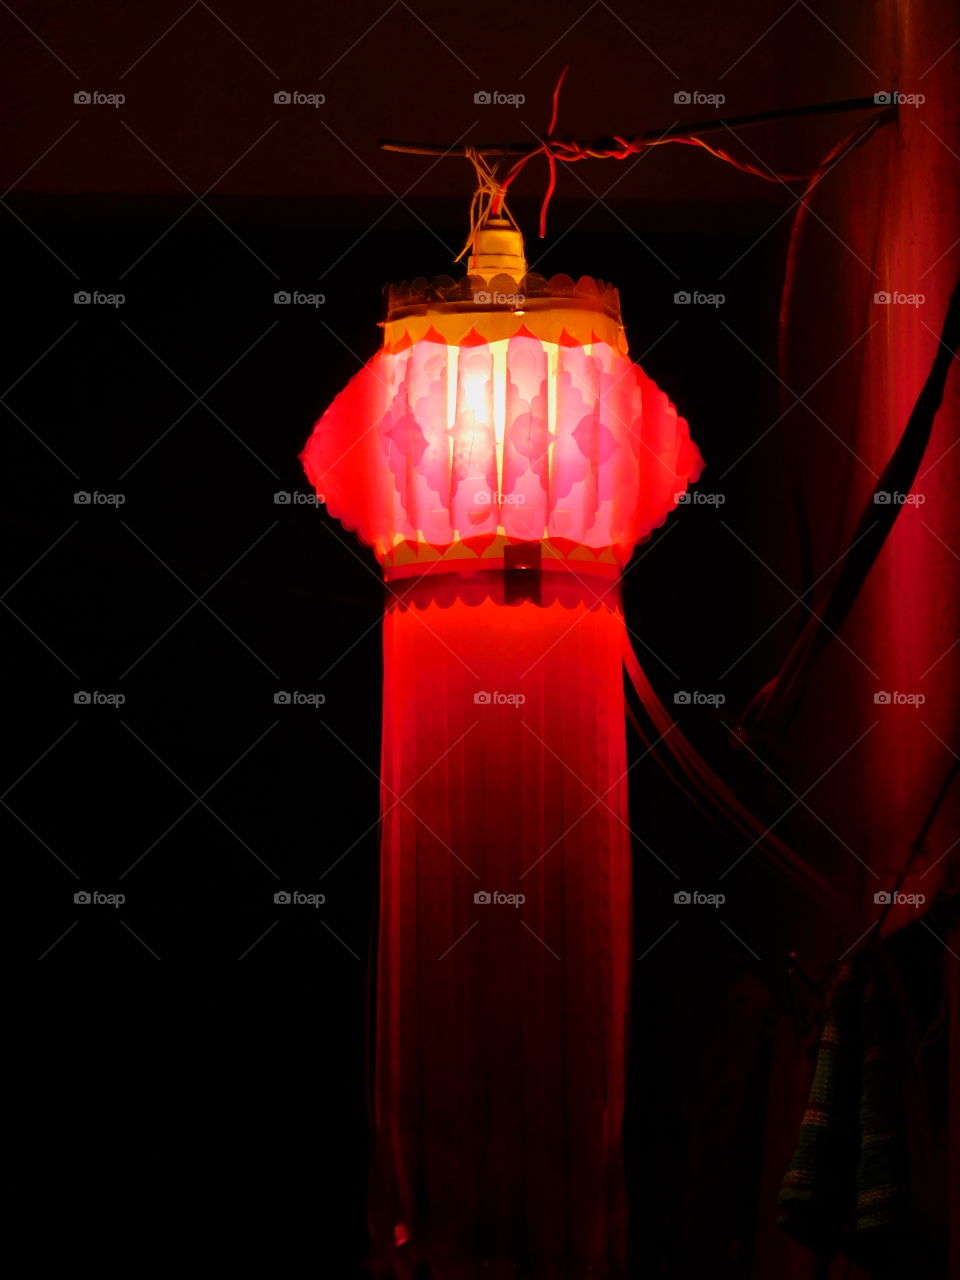 Red coloured lantern with dark black background used for decoration in Indian festival Diwali.